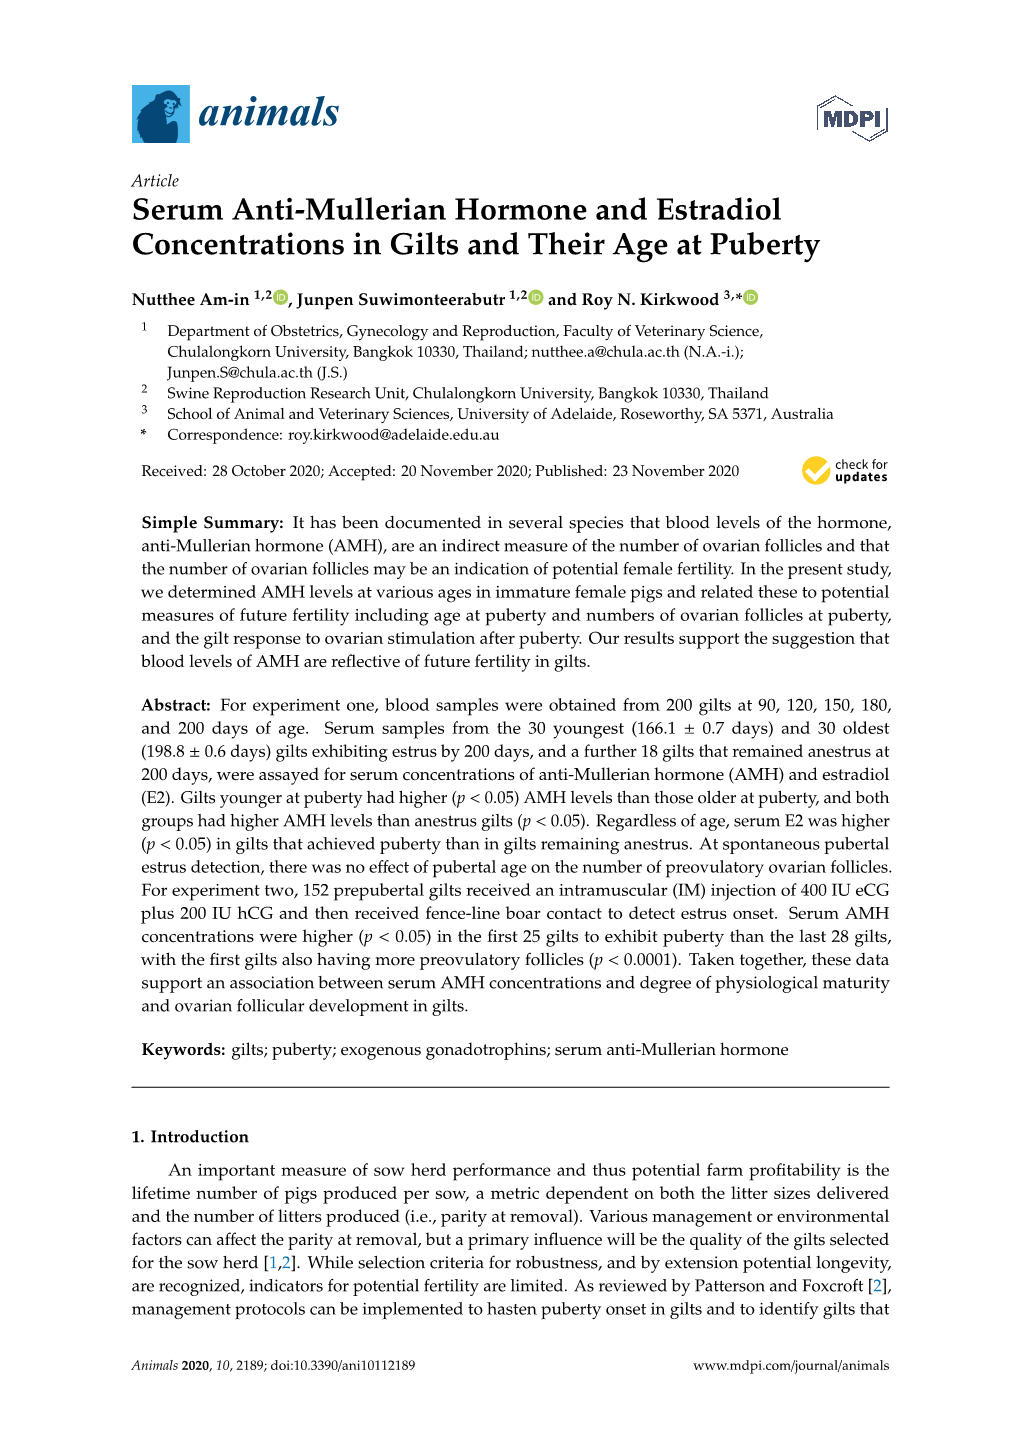 Serum Anti-Mullerian Hormone and Estradiol Concentrations in Gilts and Their Age at Puberty